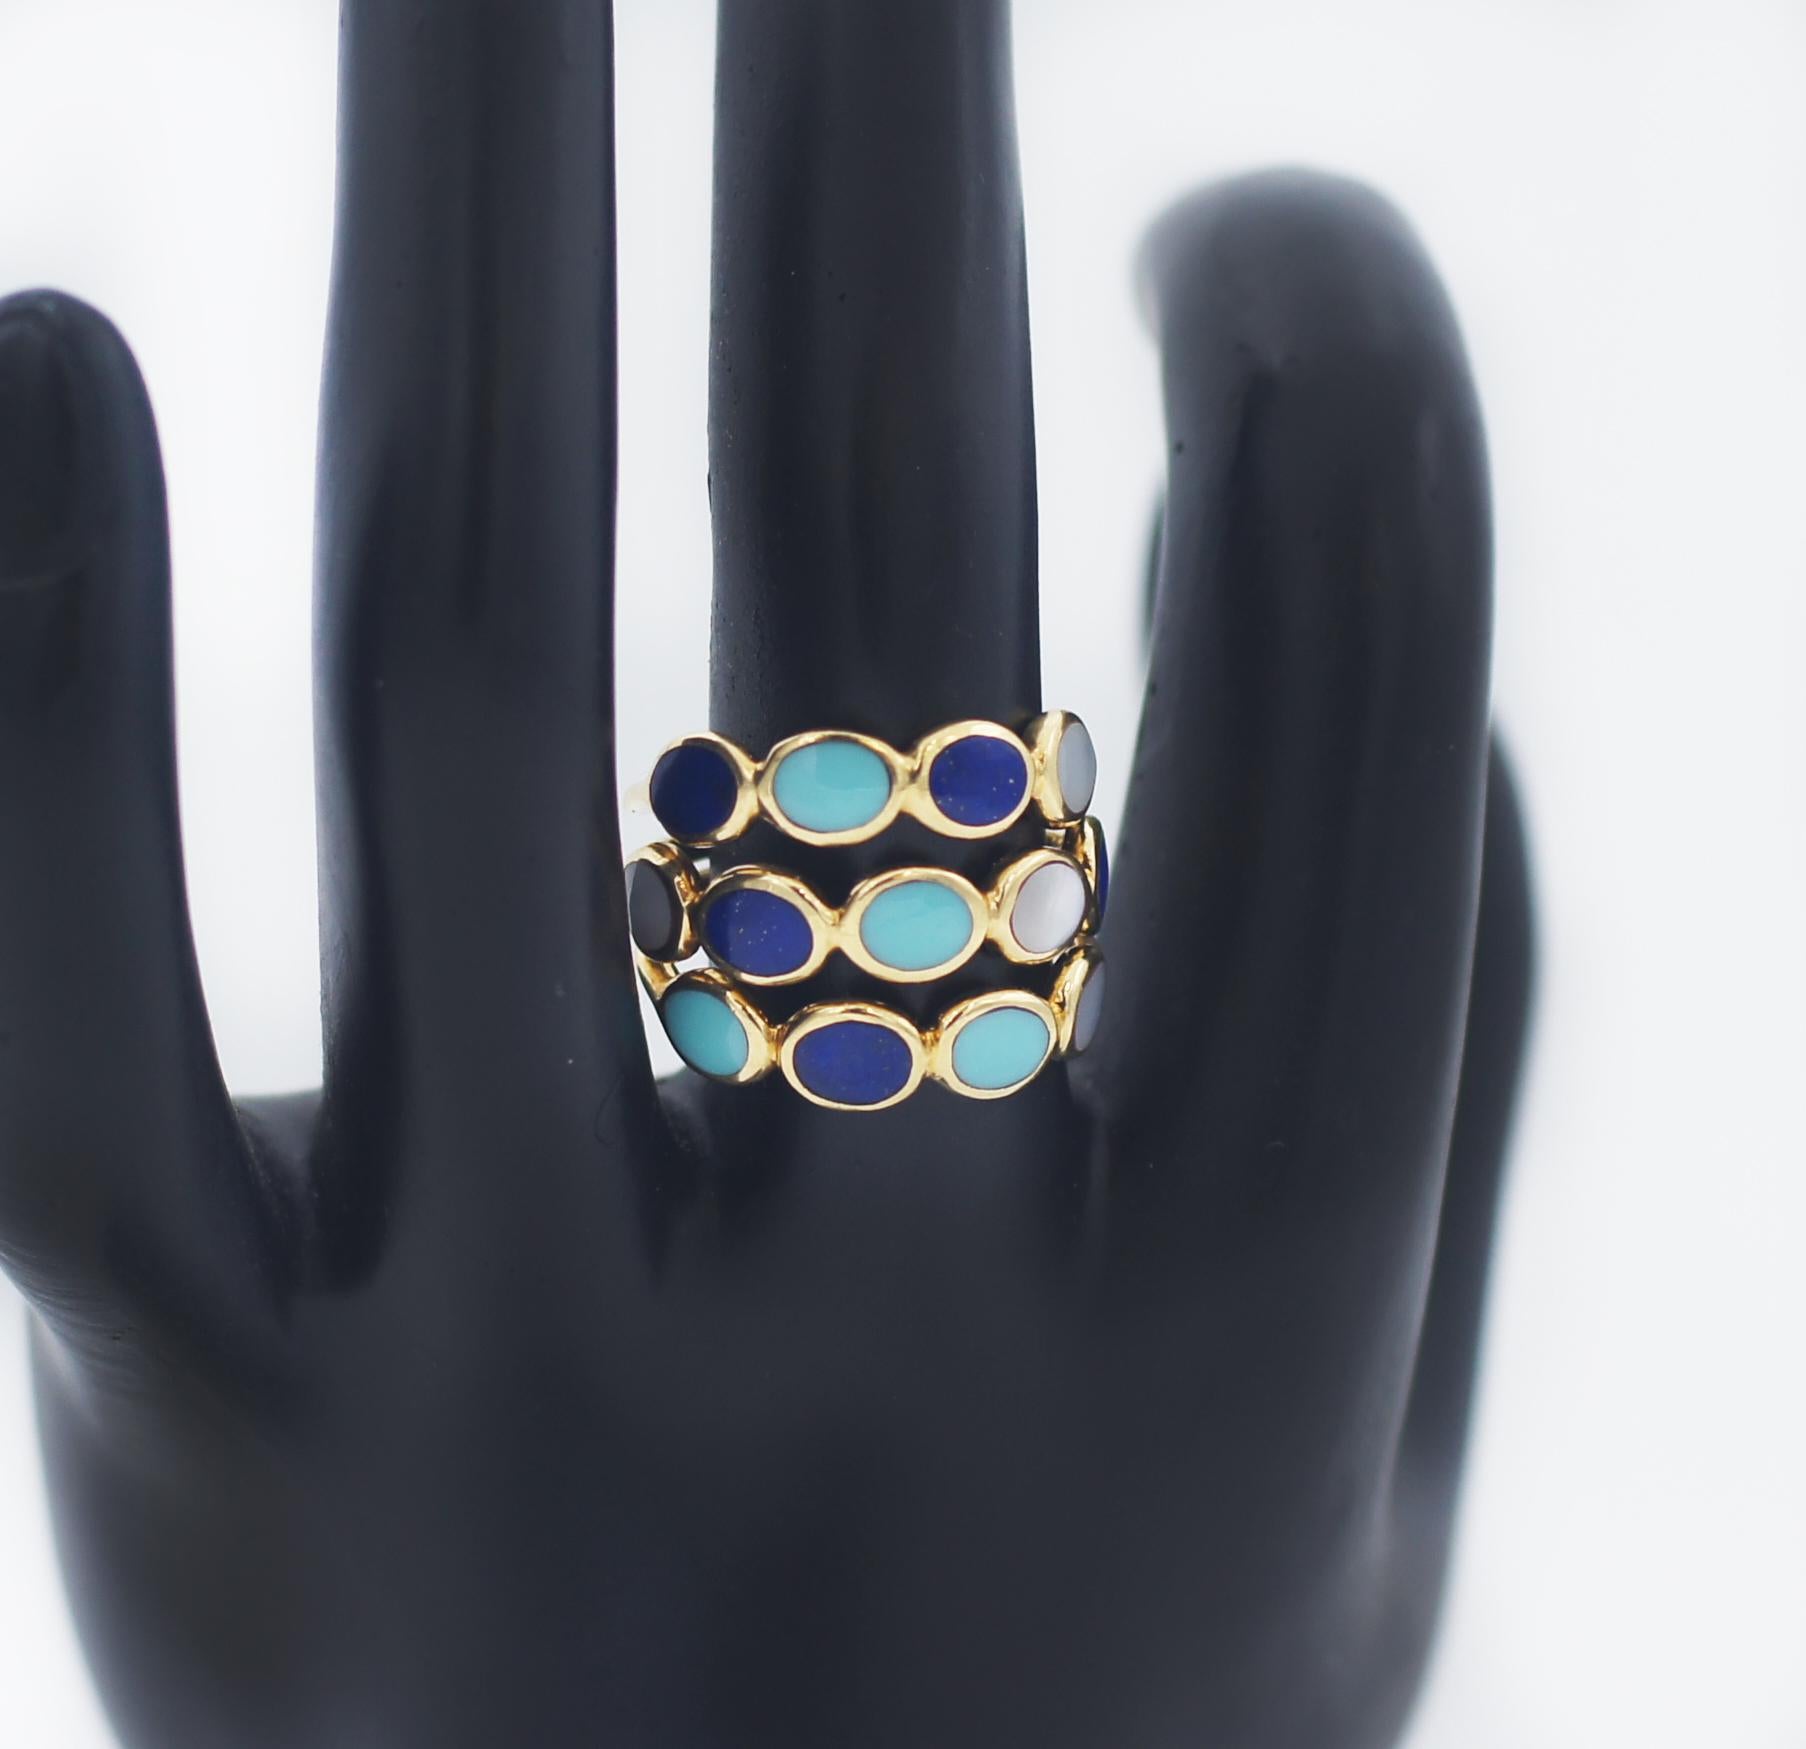 Ippolita Multi-color Gems Ring
The ring is by designer Ippolita from her Lollipop collection
Material: 18k yellow gold
Hallmark: Ippolita 18k
Gemstone: Mother of pearl, turquoise, and lapis
Ring Size: 7 (US)
Weight: Approx. 8 grams
In great looking